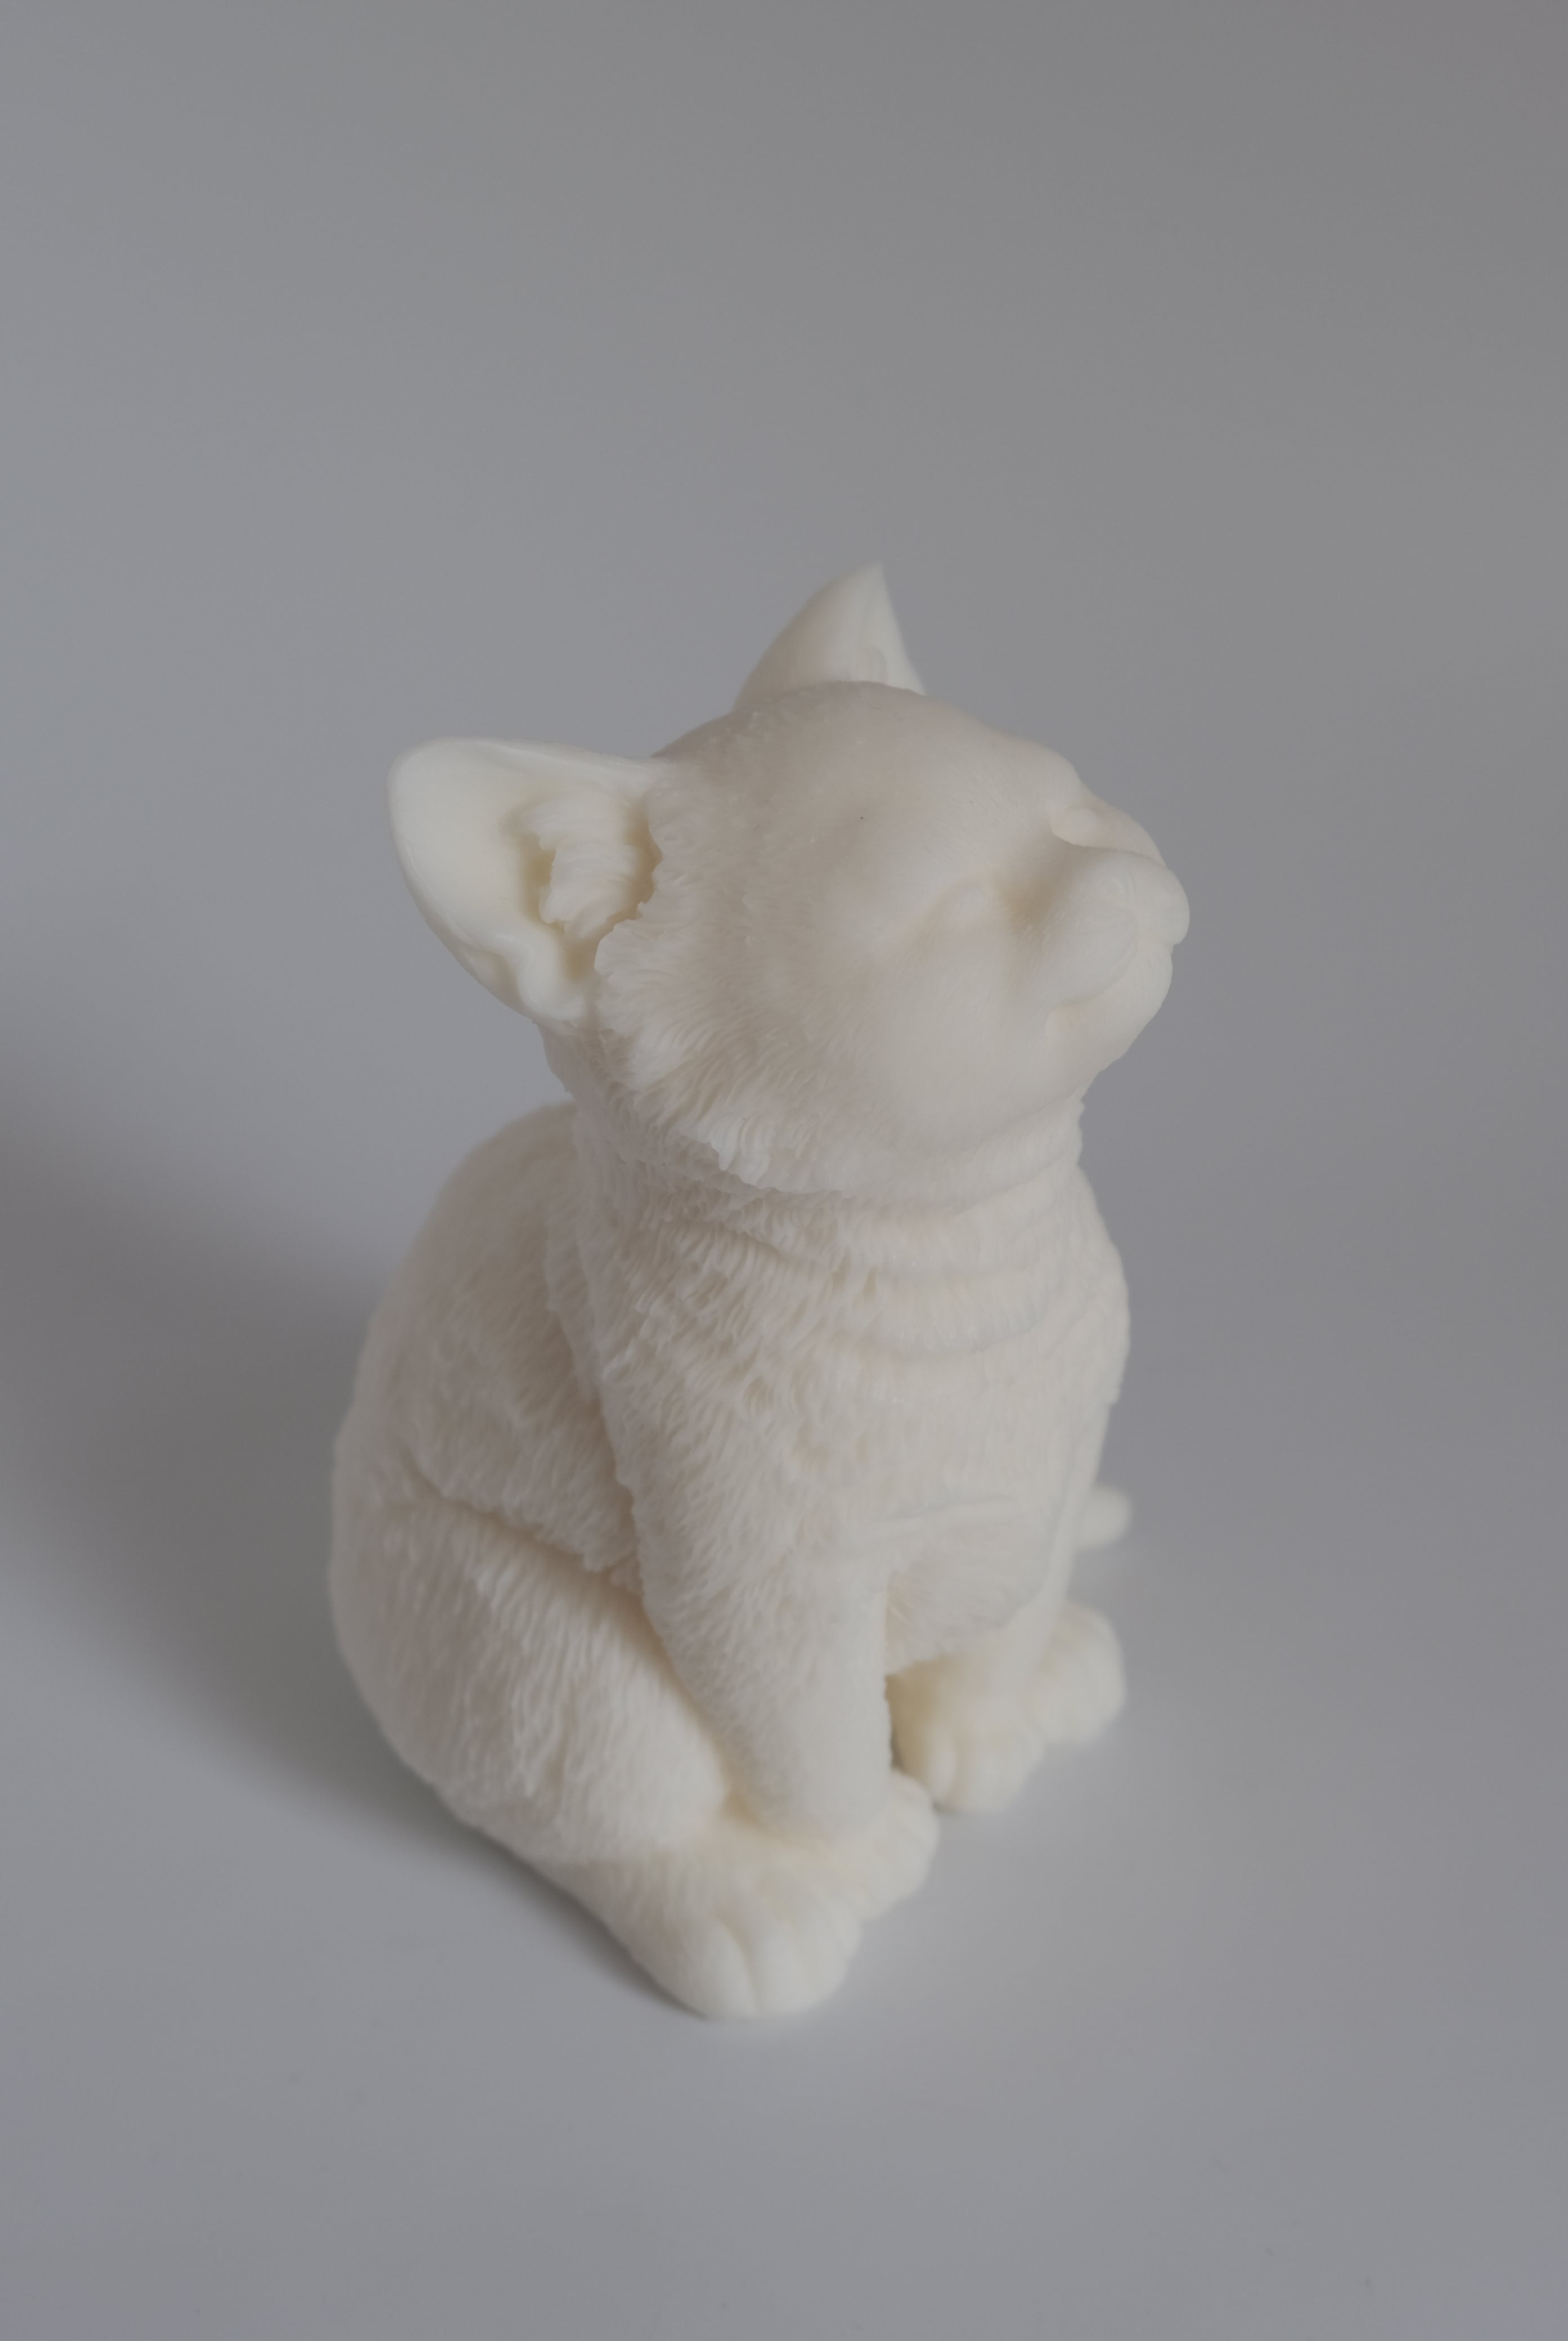 Kitten Candle Mould 1 - Silicone Mould, Mold for DIY Candles. Created using candle making kit with cotton candle wicks and candle colour chips. Using soy wax for pillar candles. Sold by Myka Candles Moulds Australia